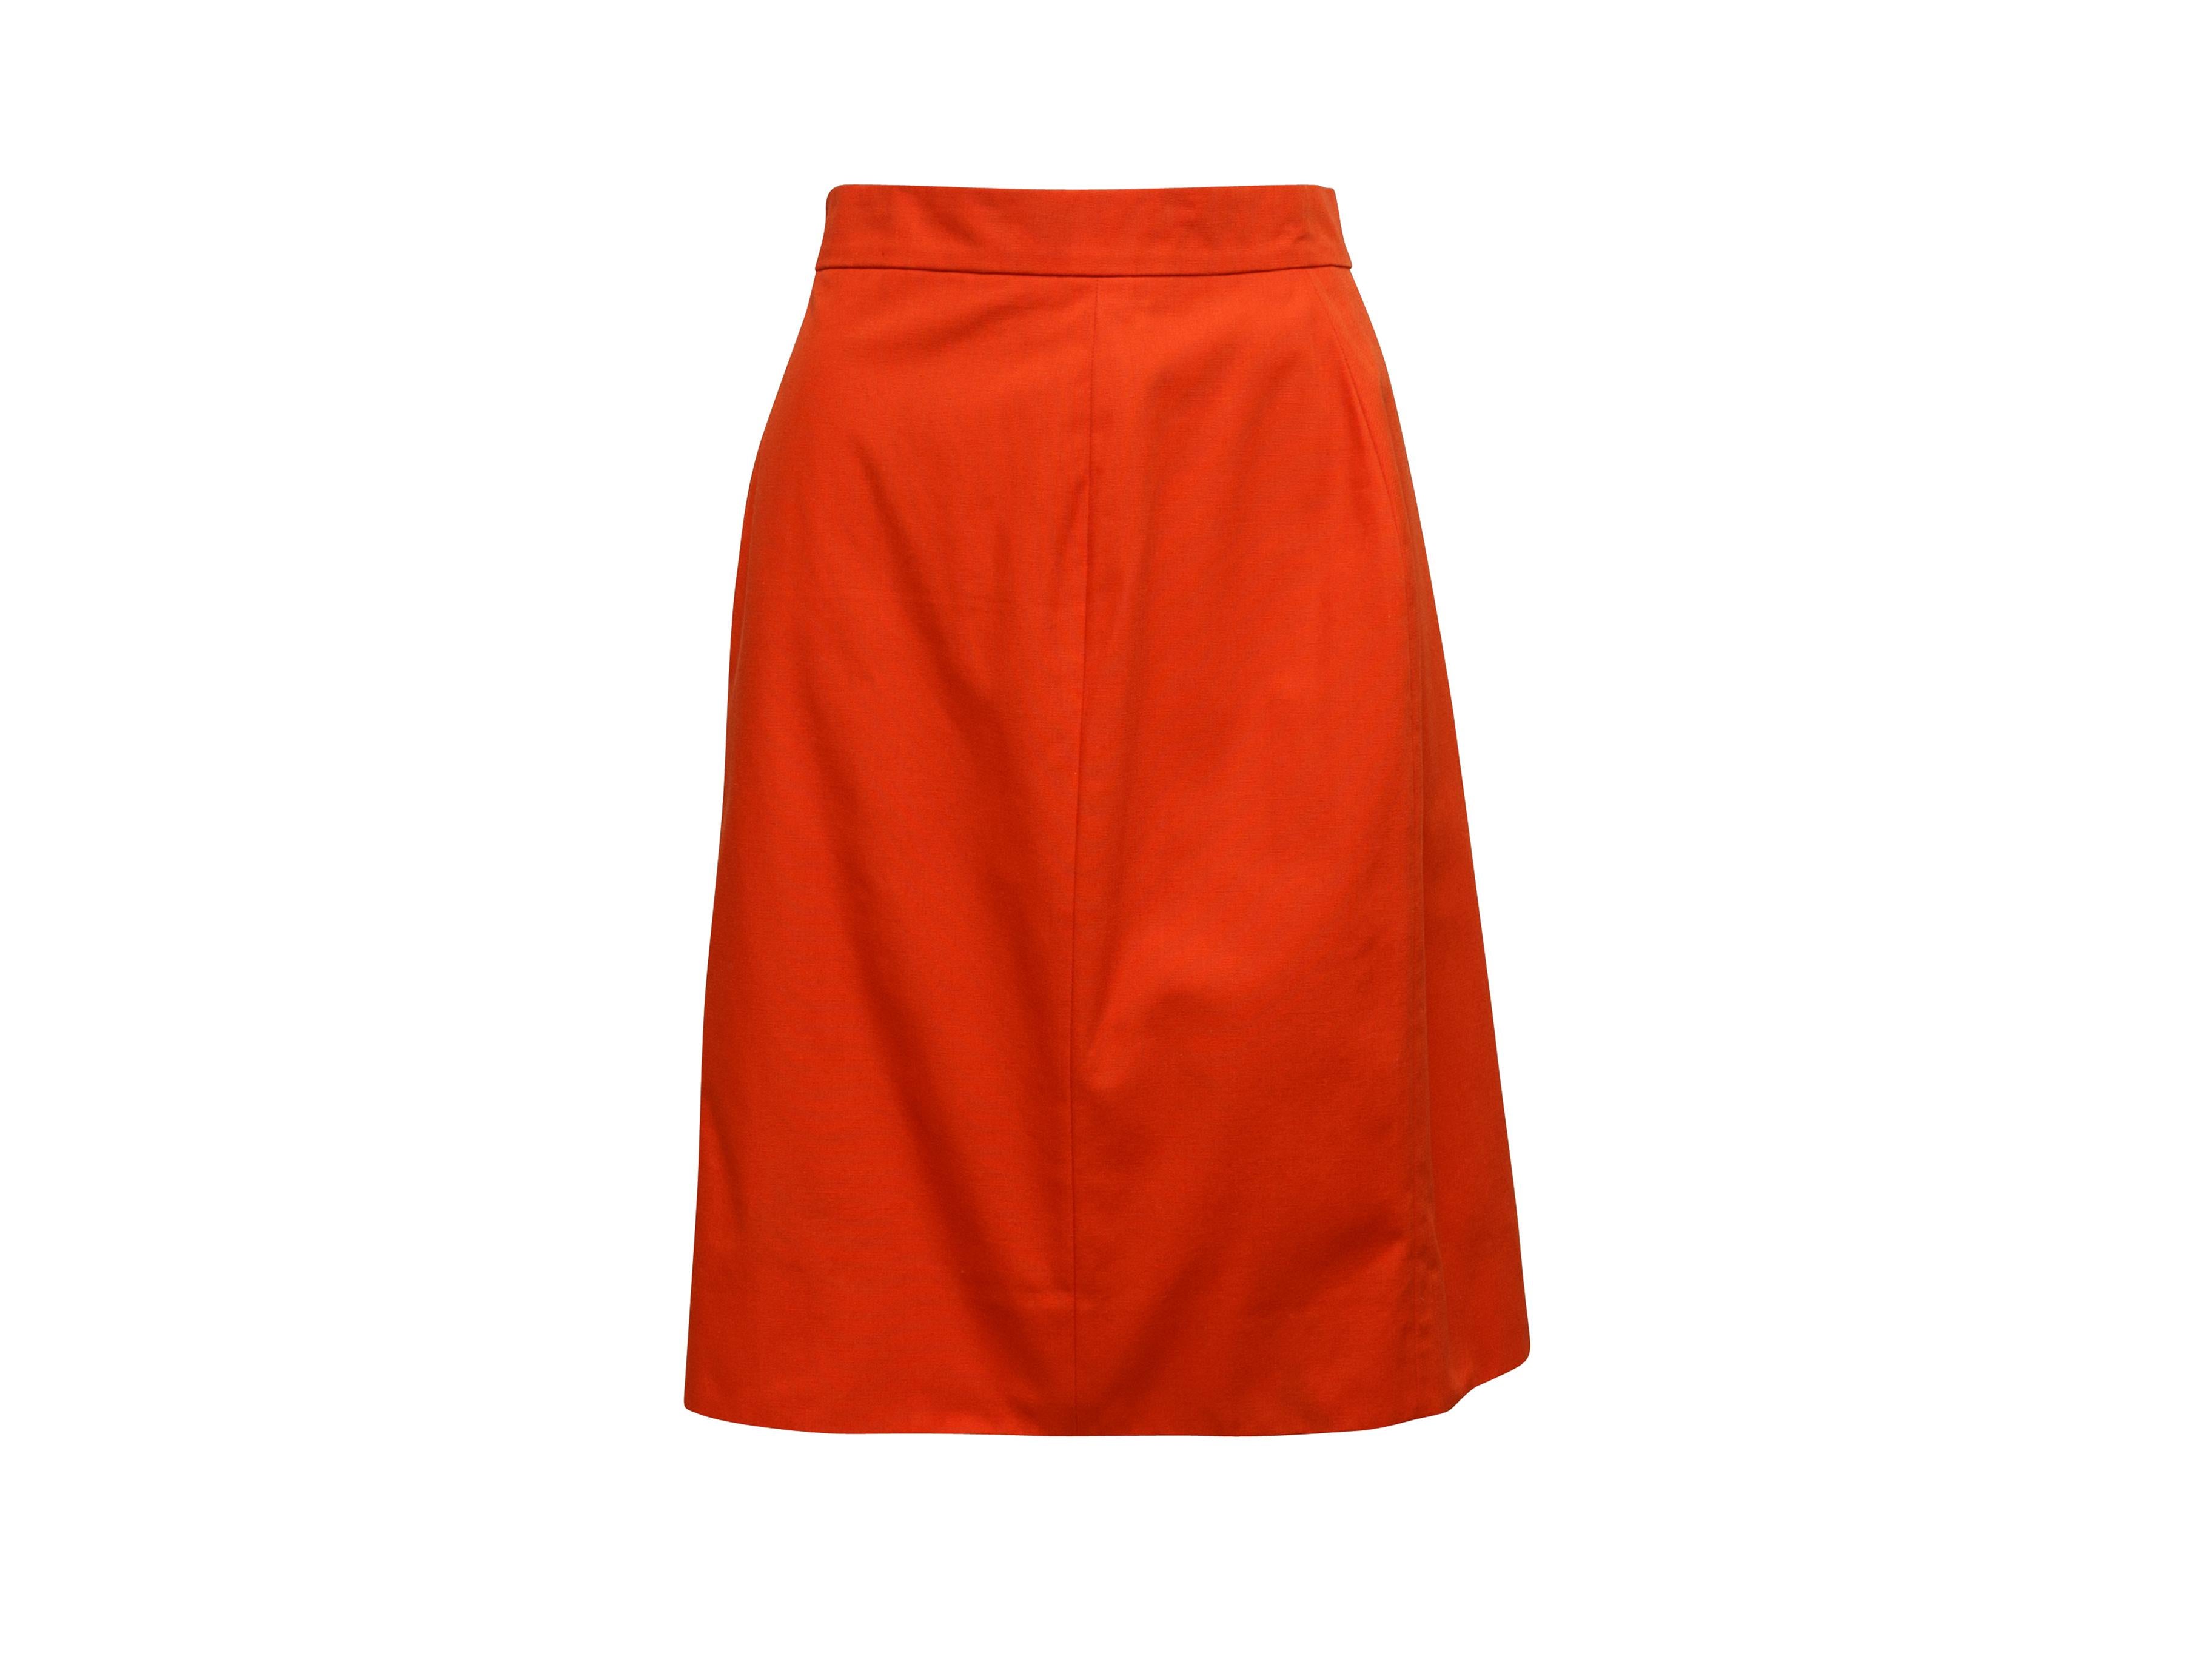 Product details: Vintage bright orange skirt suit by Chanel Boutique. V-neck. Four pockets. Orange and gold-tone CC button closures at front of jacket. Zip closure at skirt. Jacket- 34